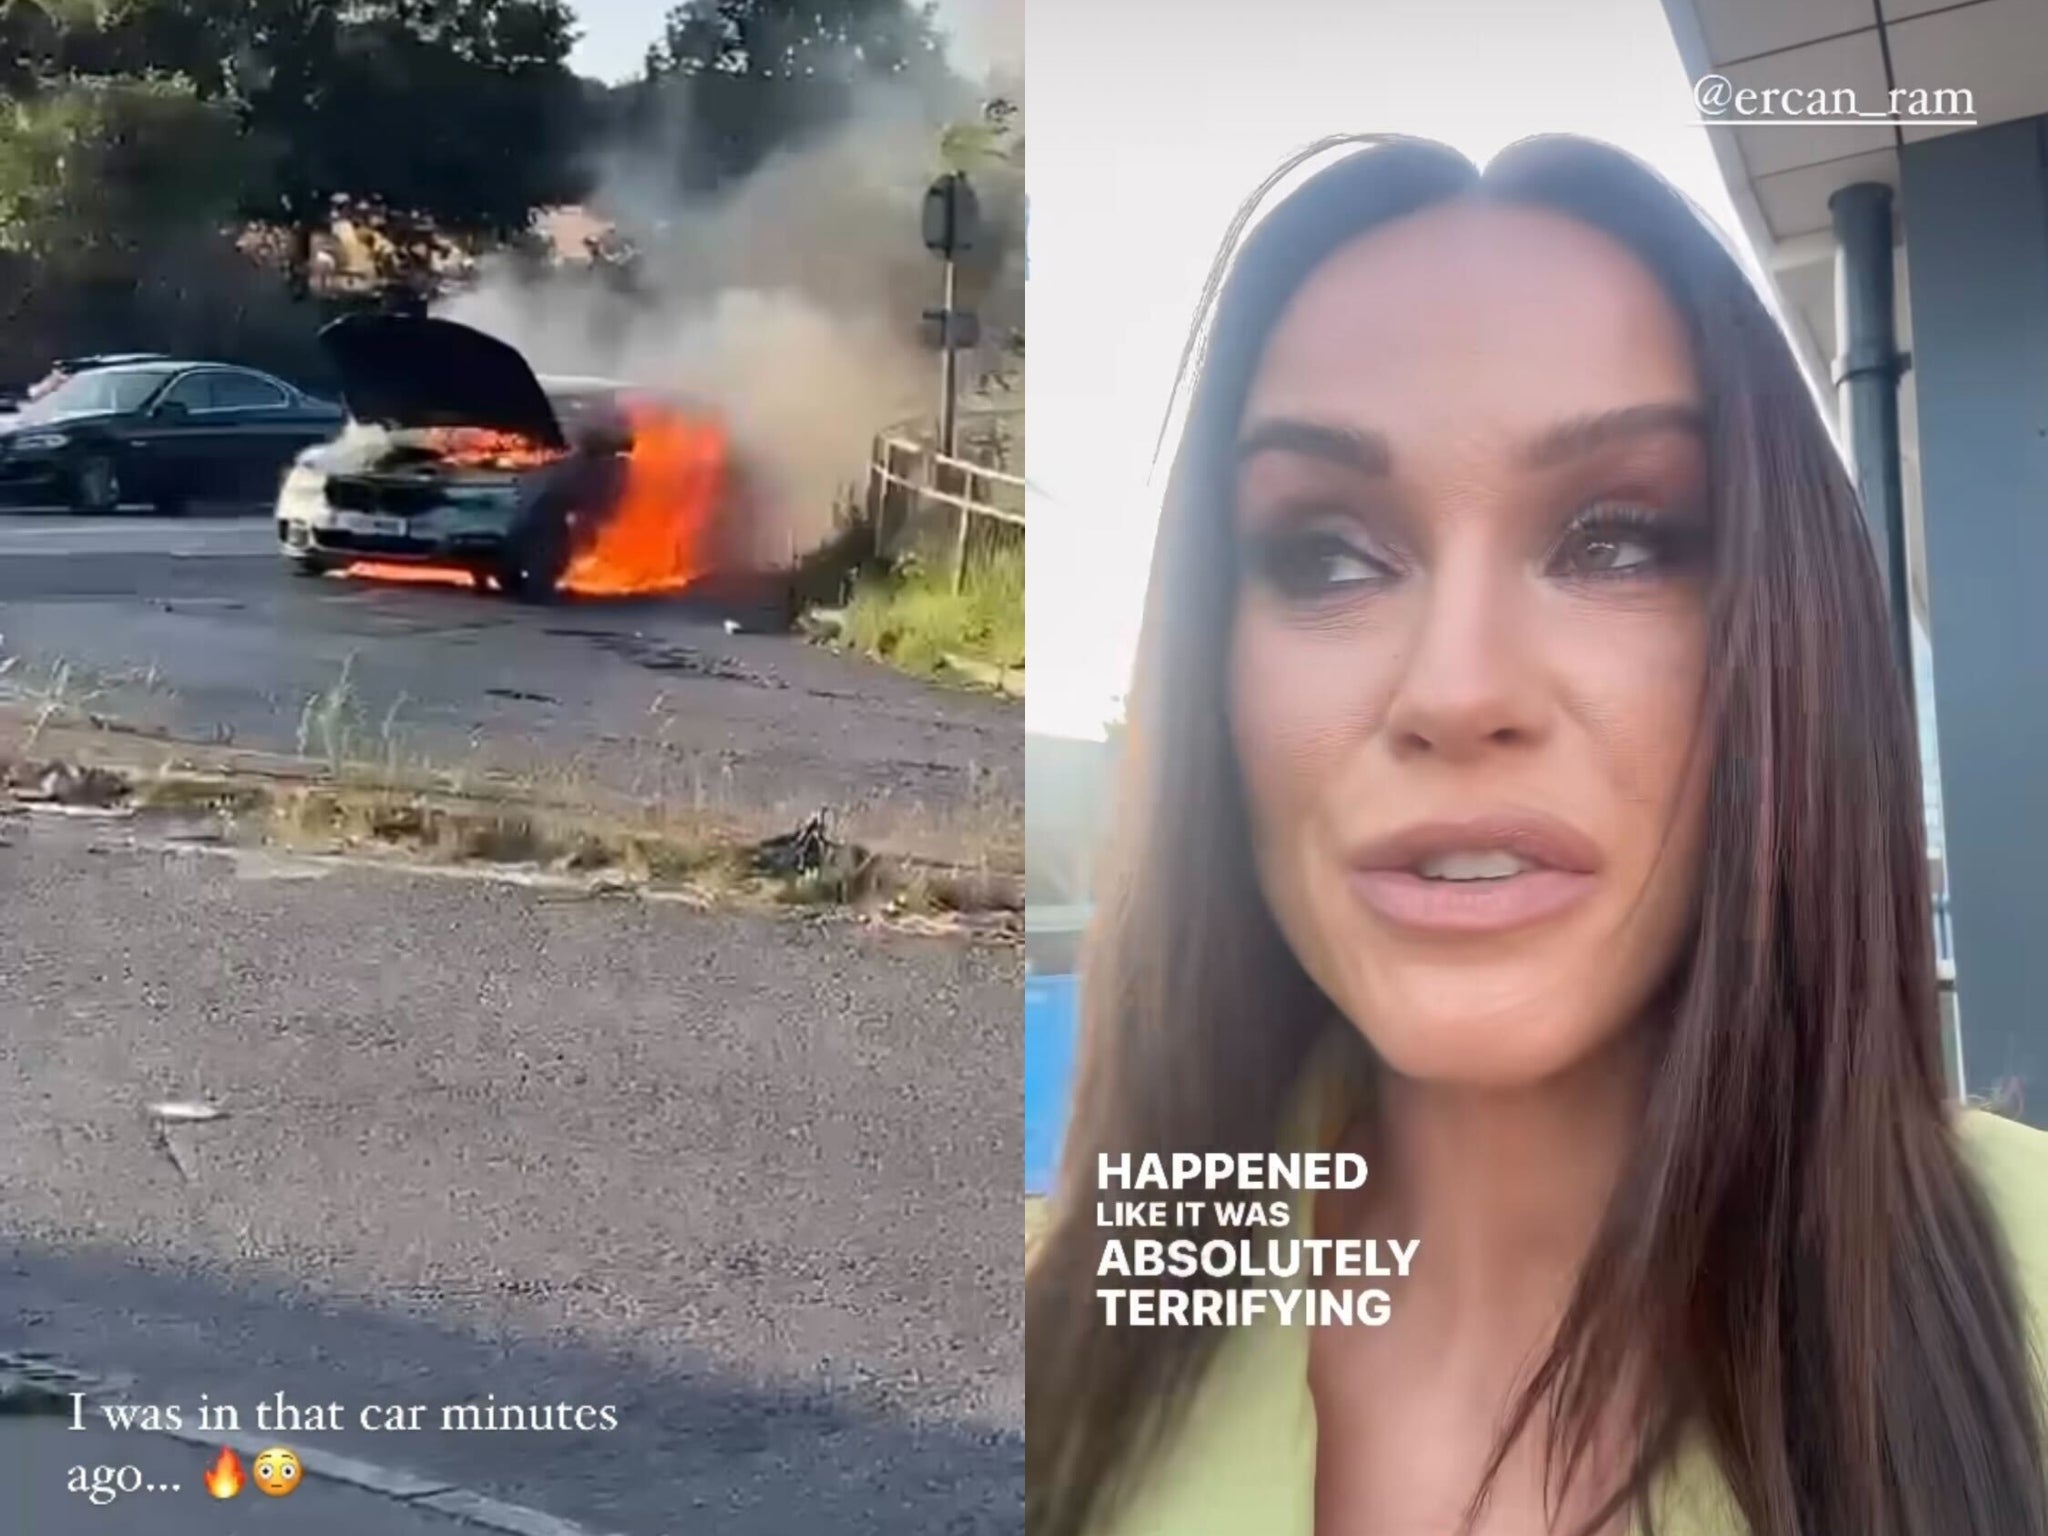 Vicky Pattison detailed how an Uber she had been in burst into flames moments after she got out